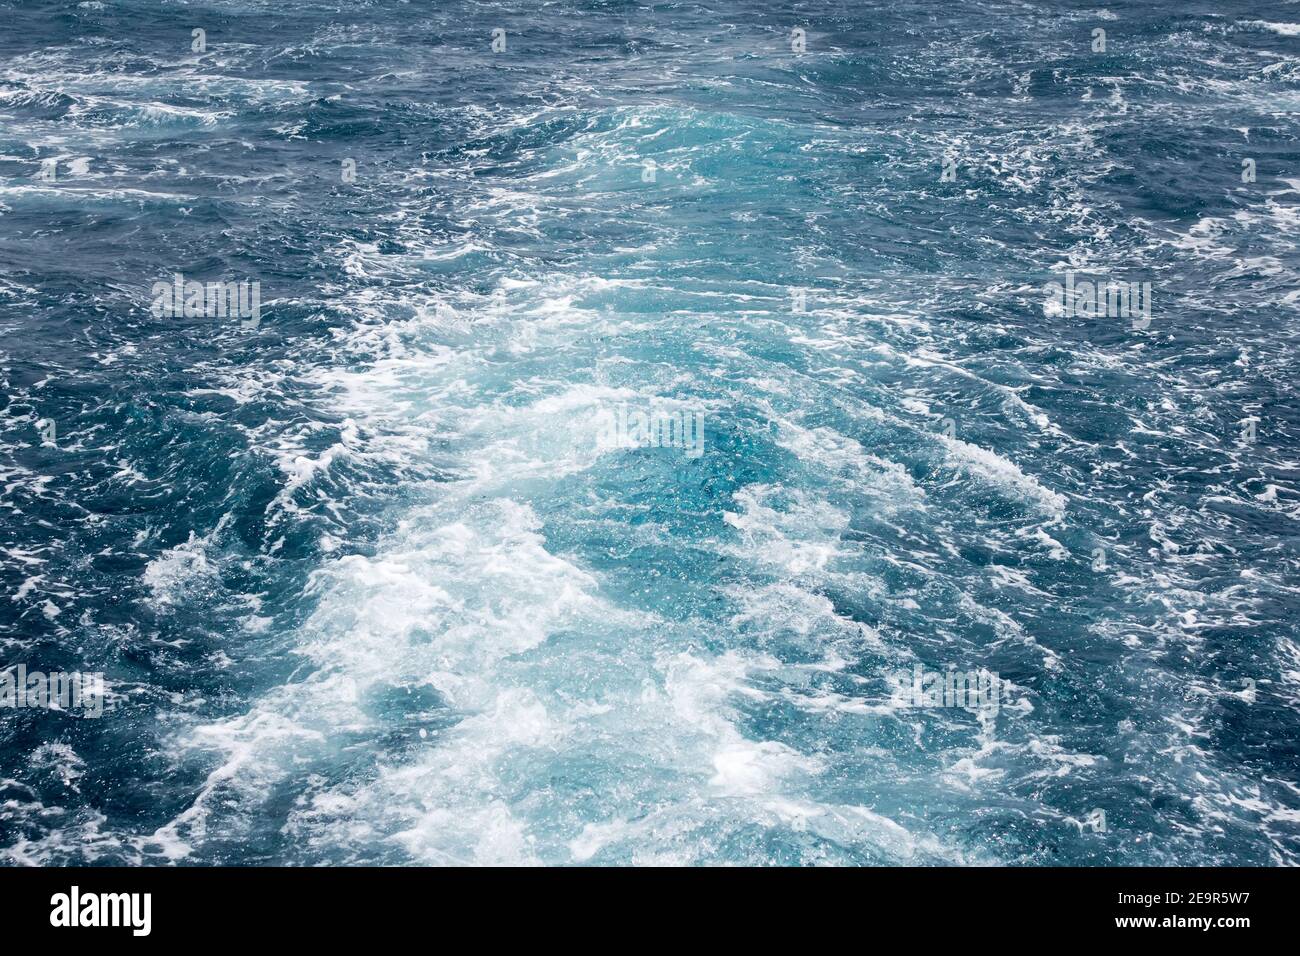 Boat Wave ocean trace on blue sea fresh water background. Traveling destinations Red Sea Seashore Egypt. Stock Photo